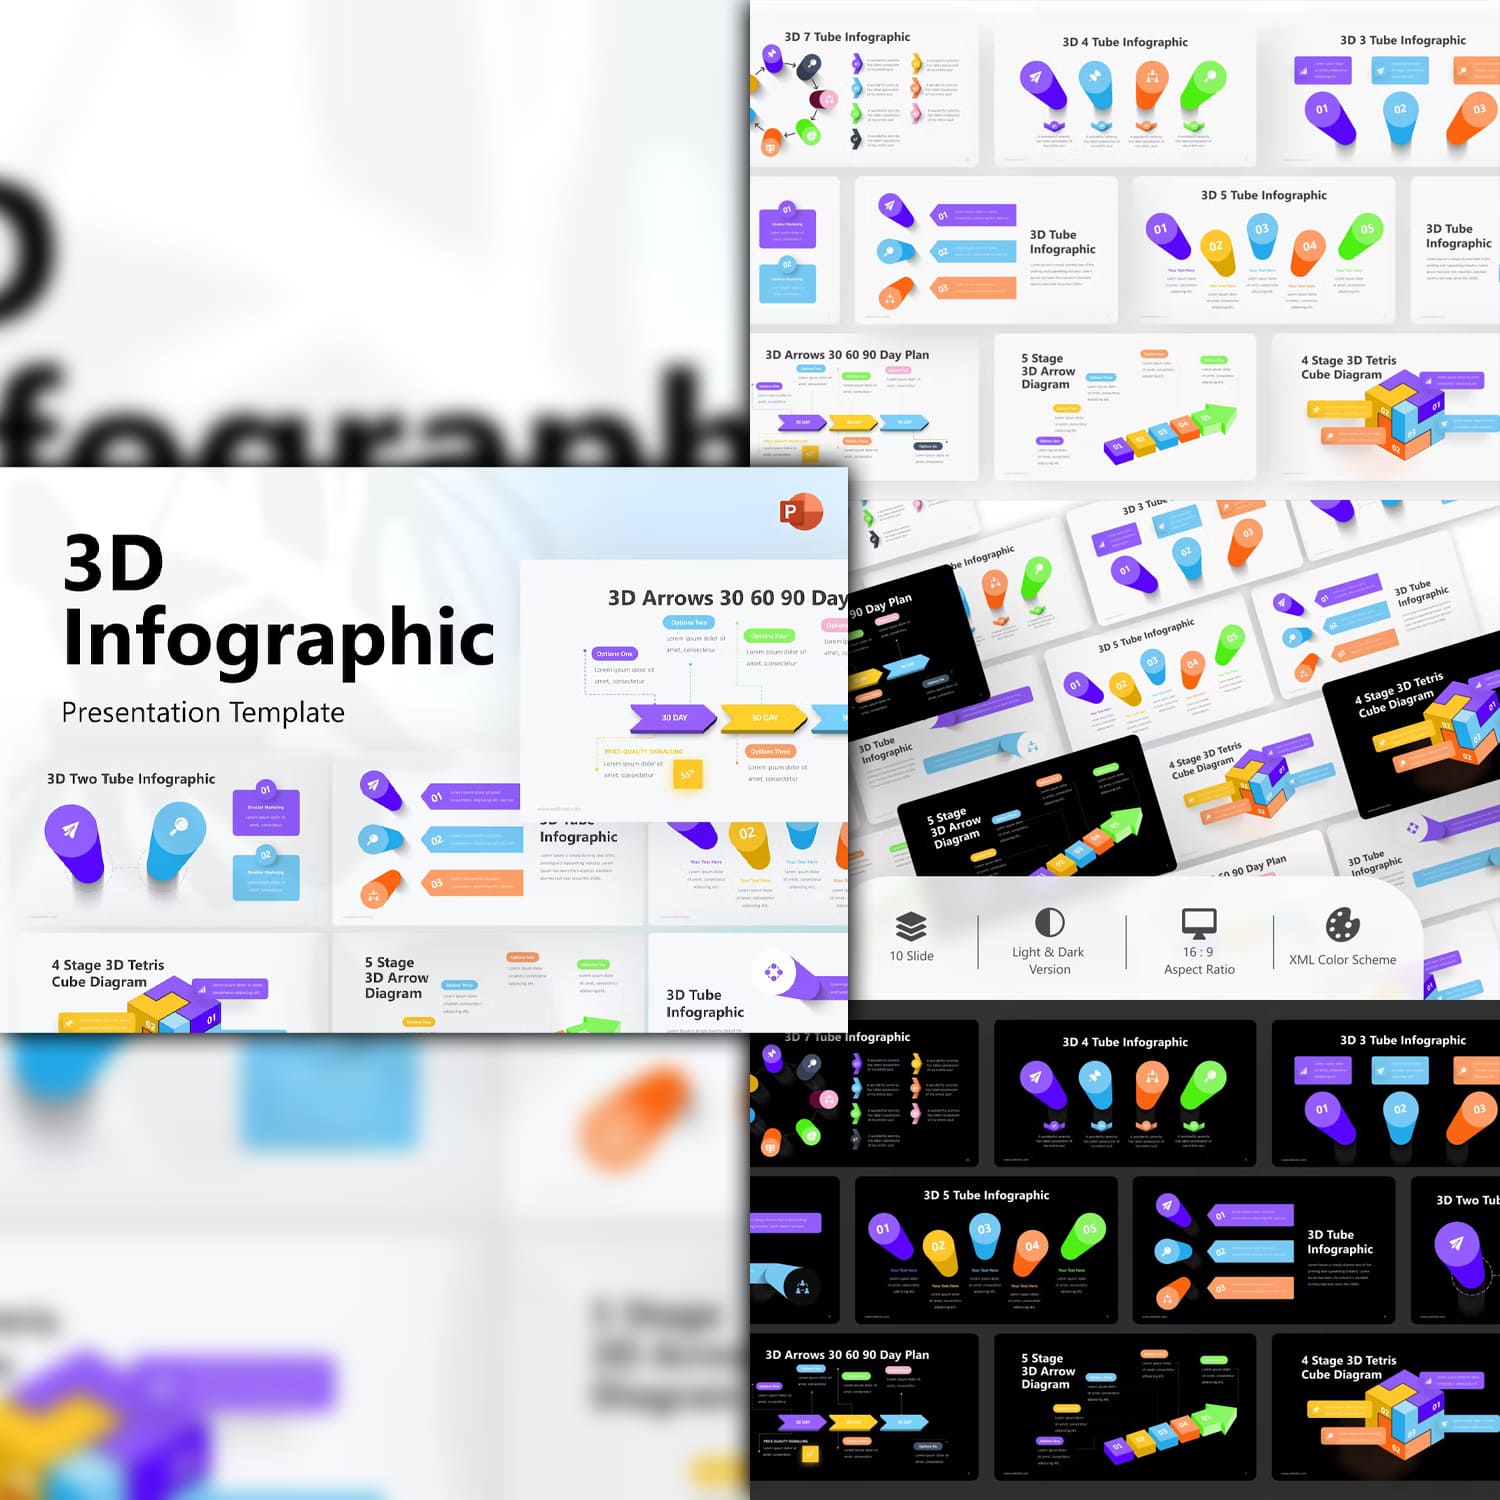 3d infographic powerpoint template from RRgraph.